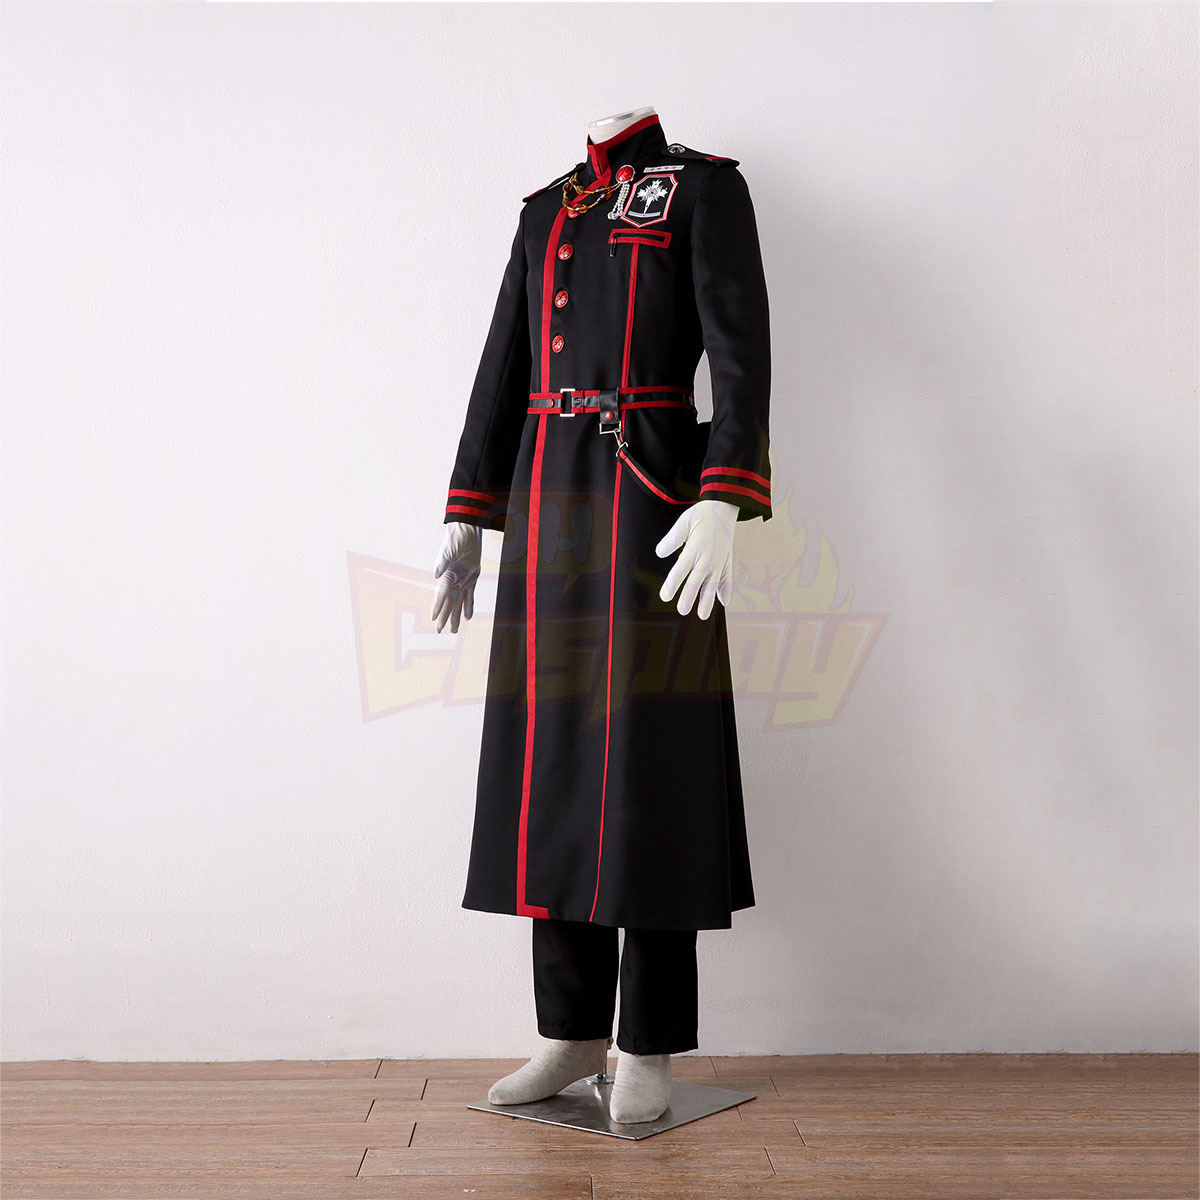 D.Gray-man Yu Kanda 3RD Cosplay Costumes Deluxe Edition